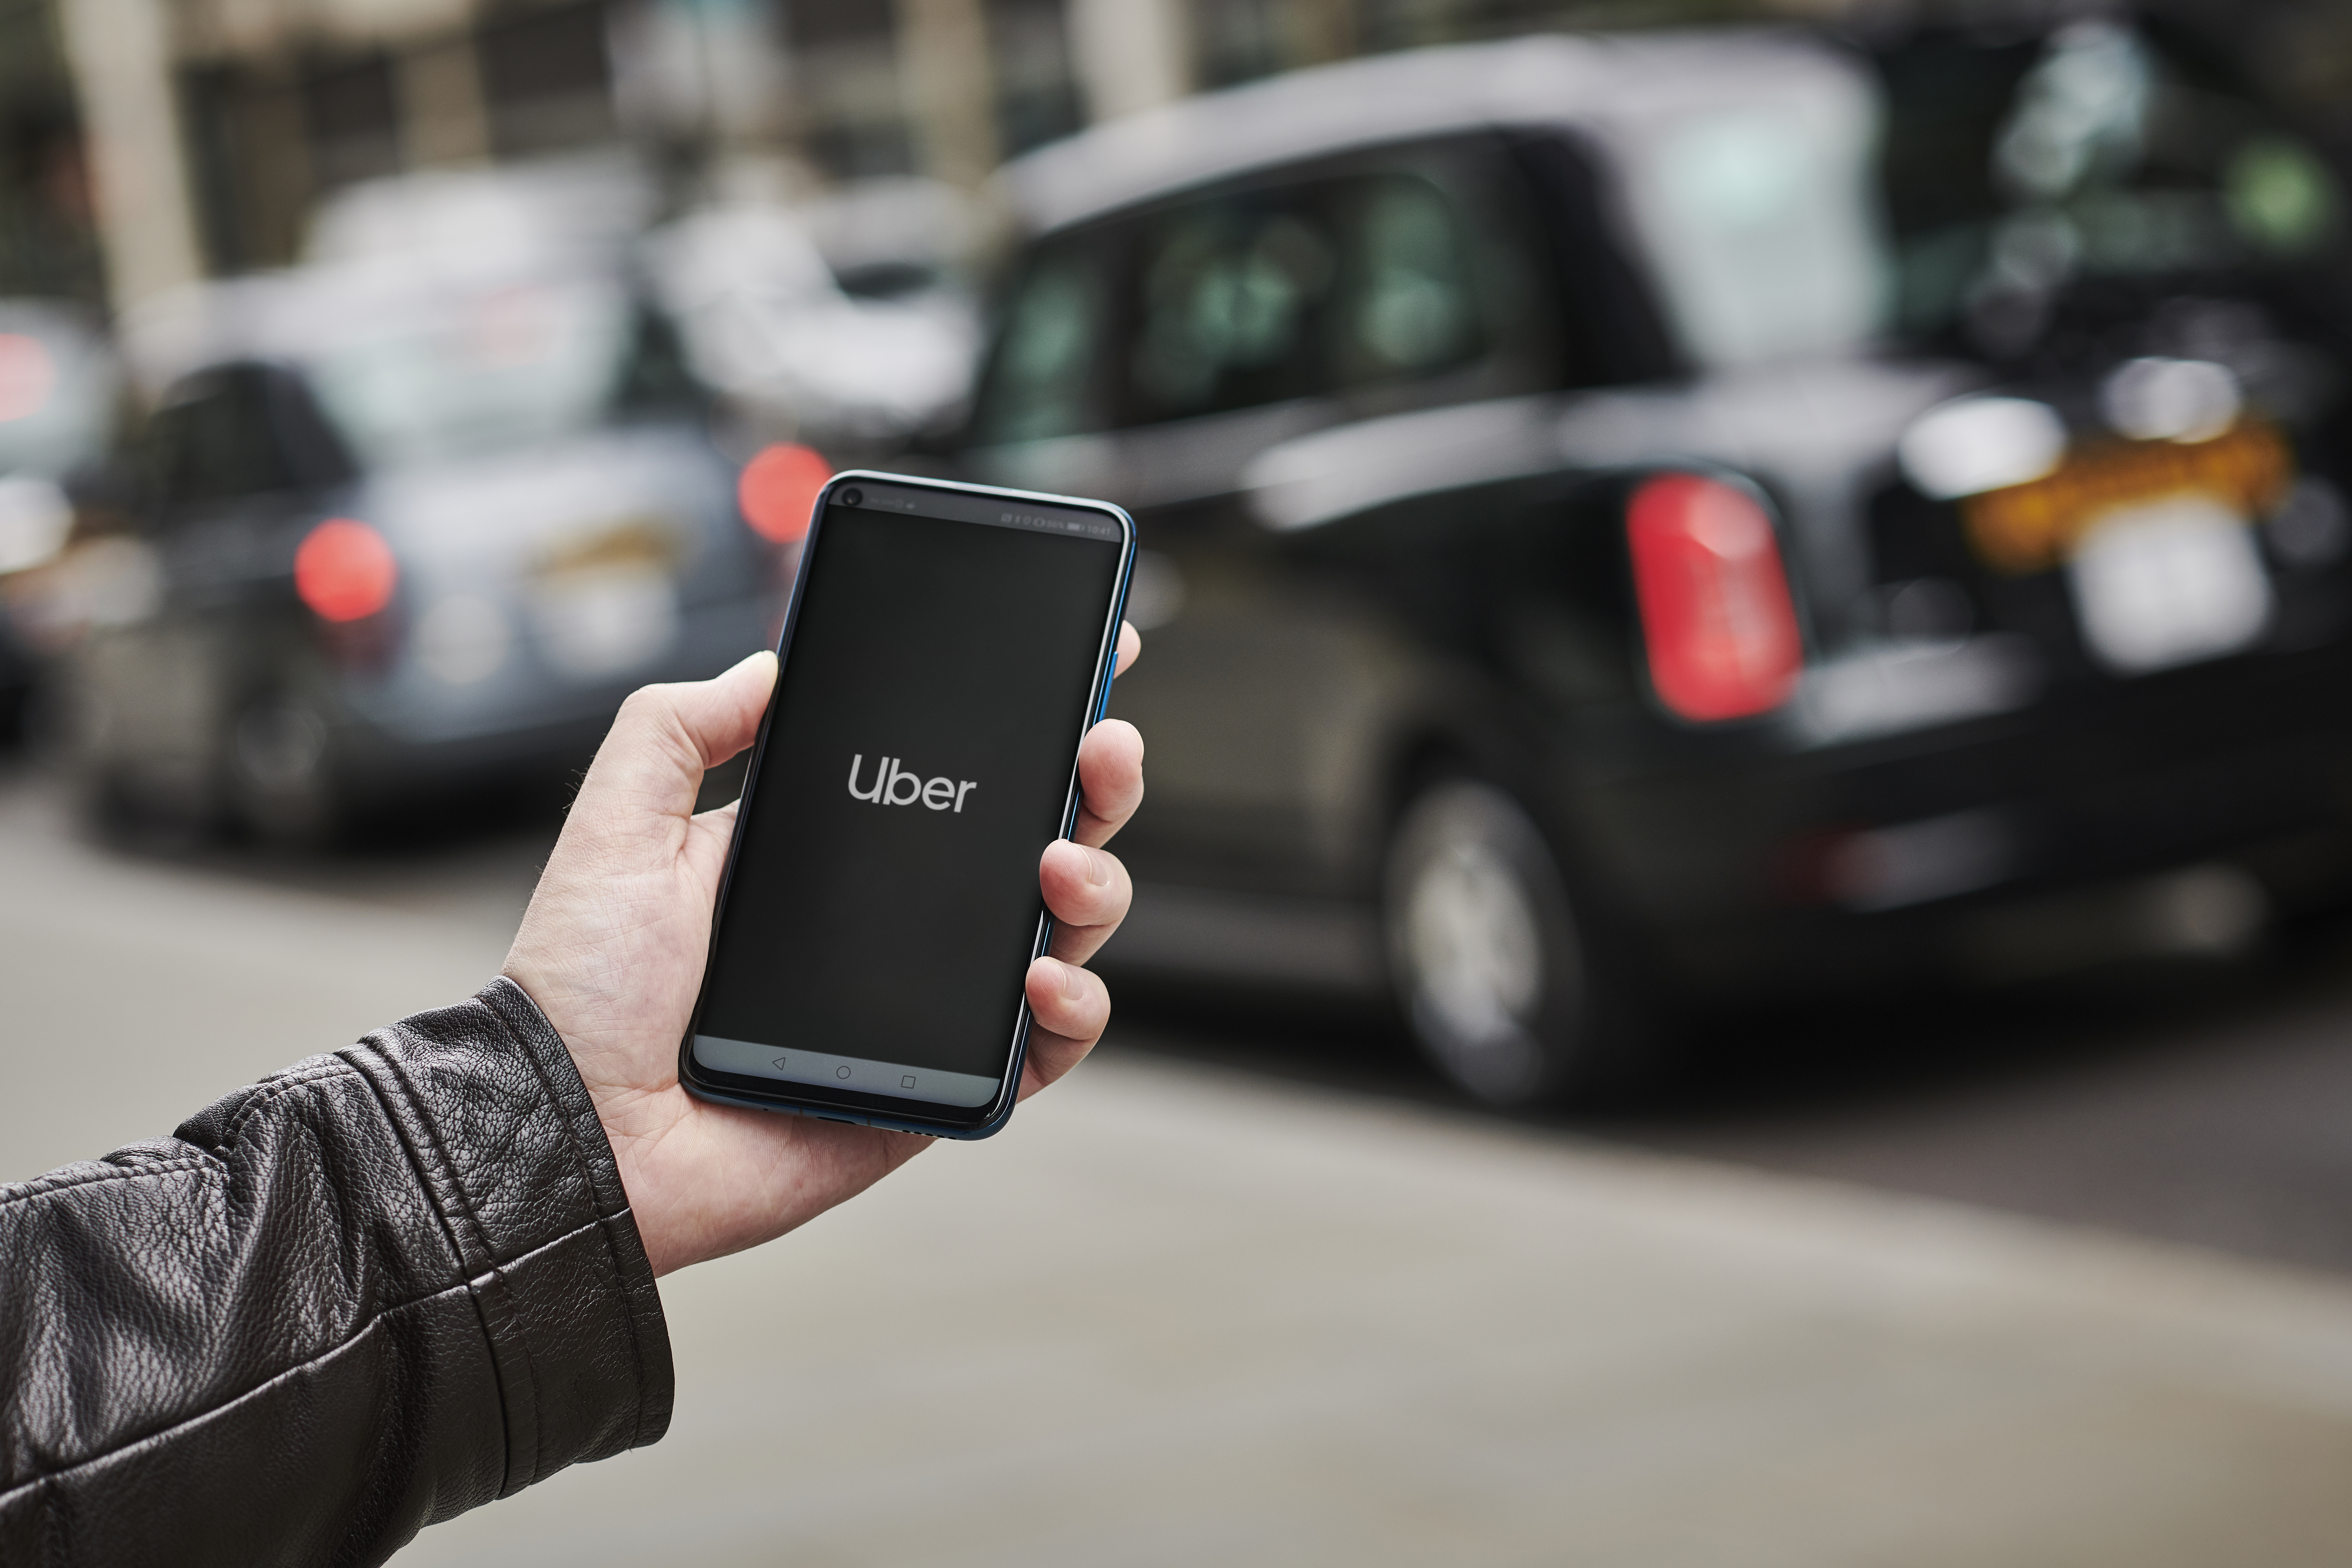 A man wearing a leather jacket holds a smartphone displaying the Uber app.